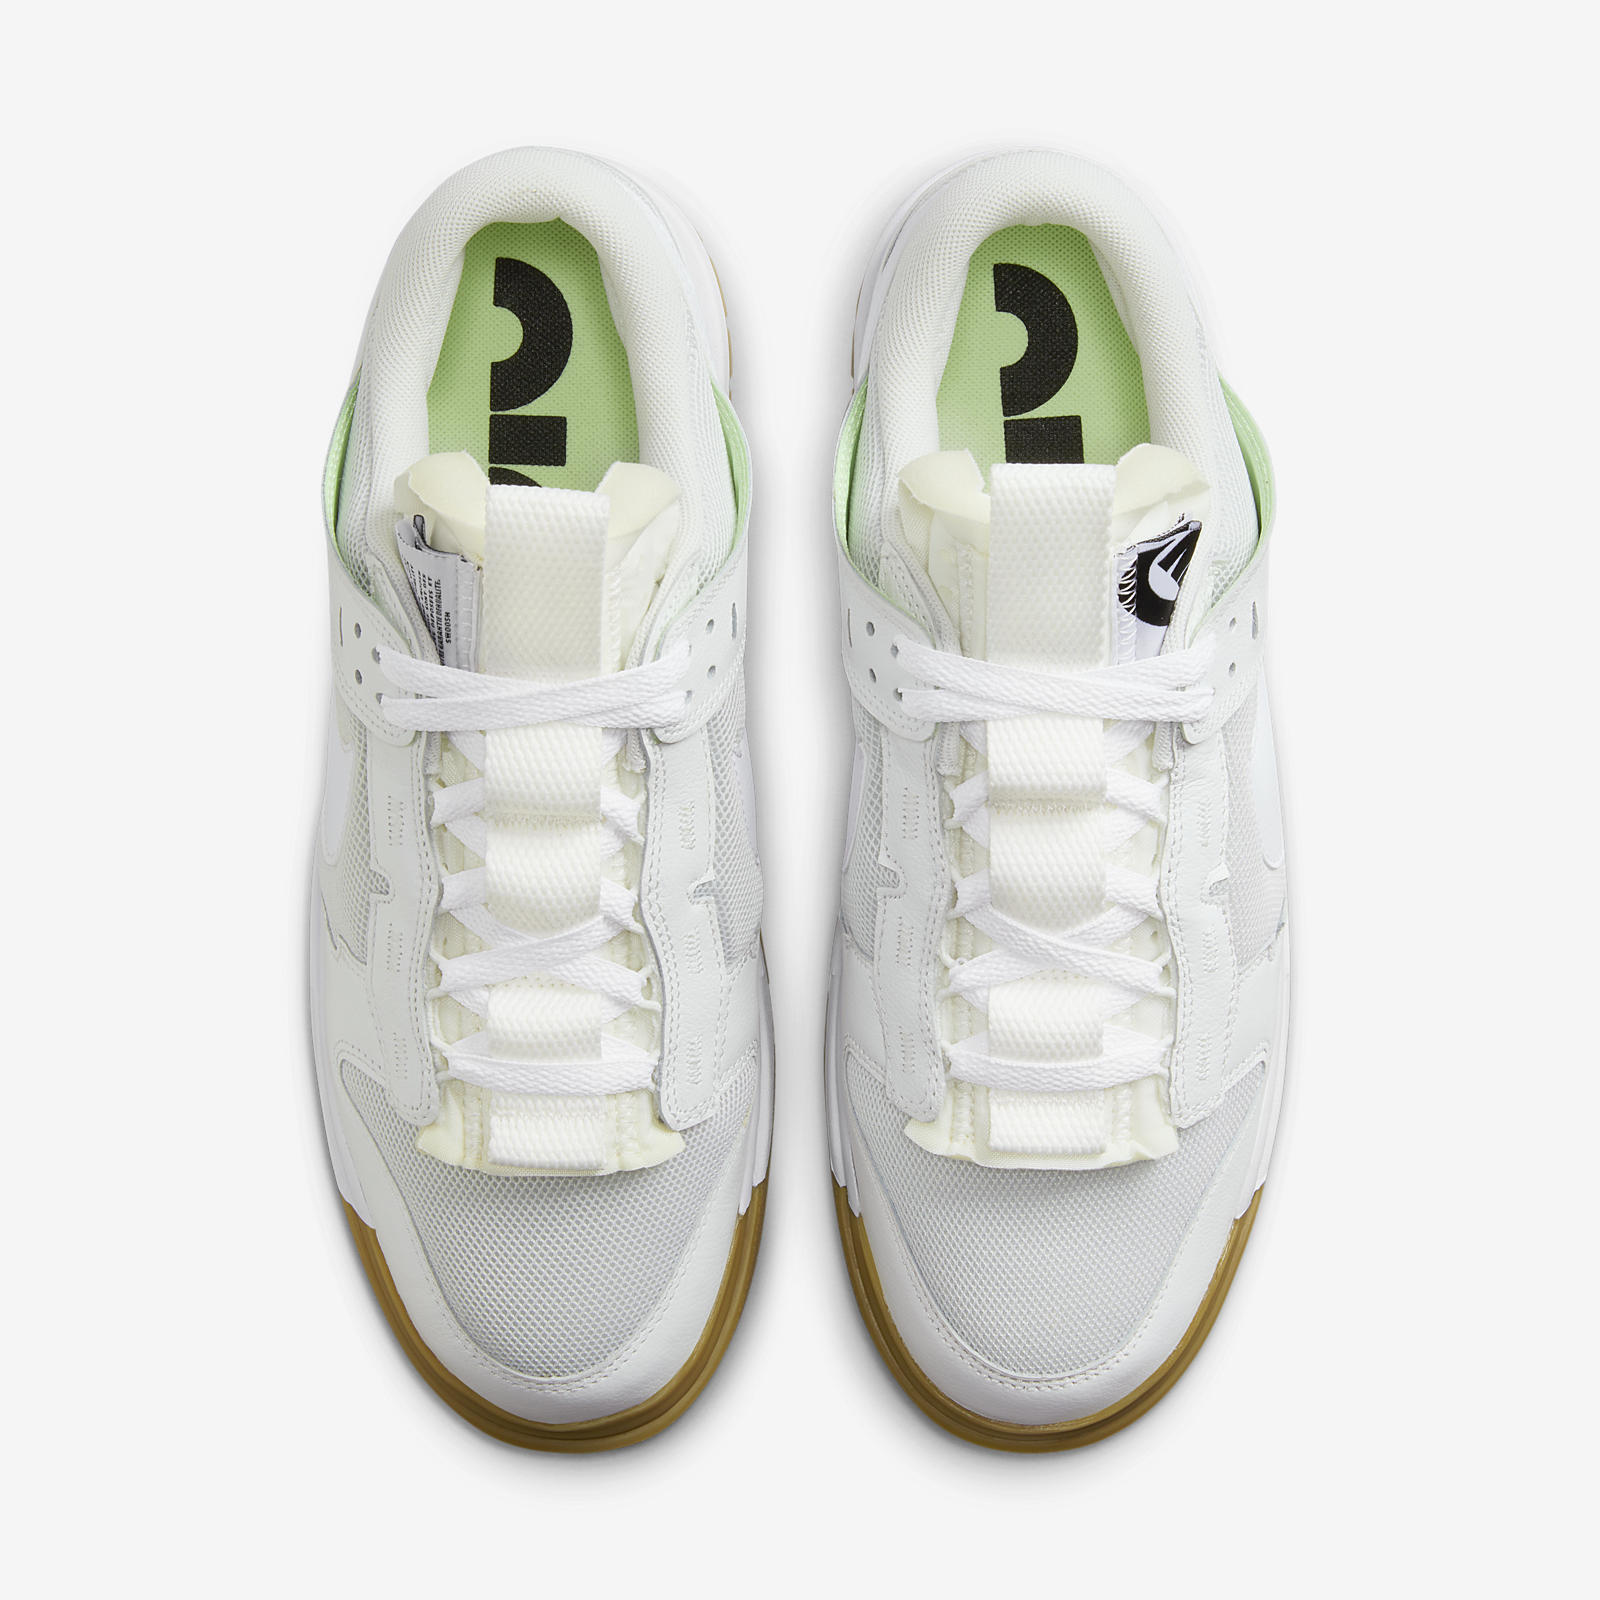 Nike Dunk Low Remastered
« Photon Dust »